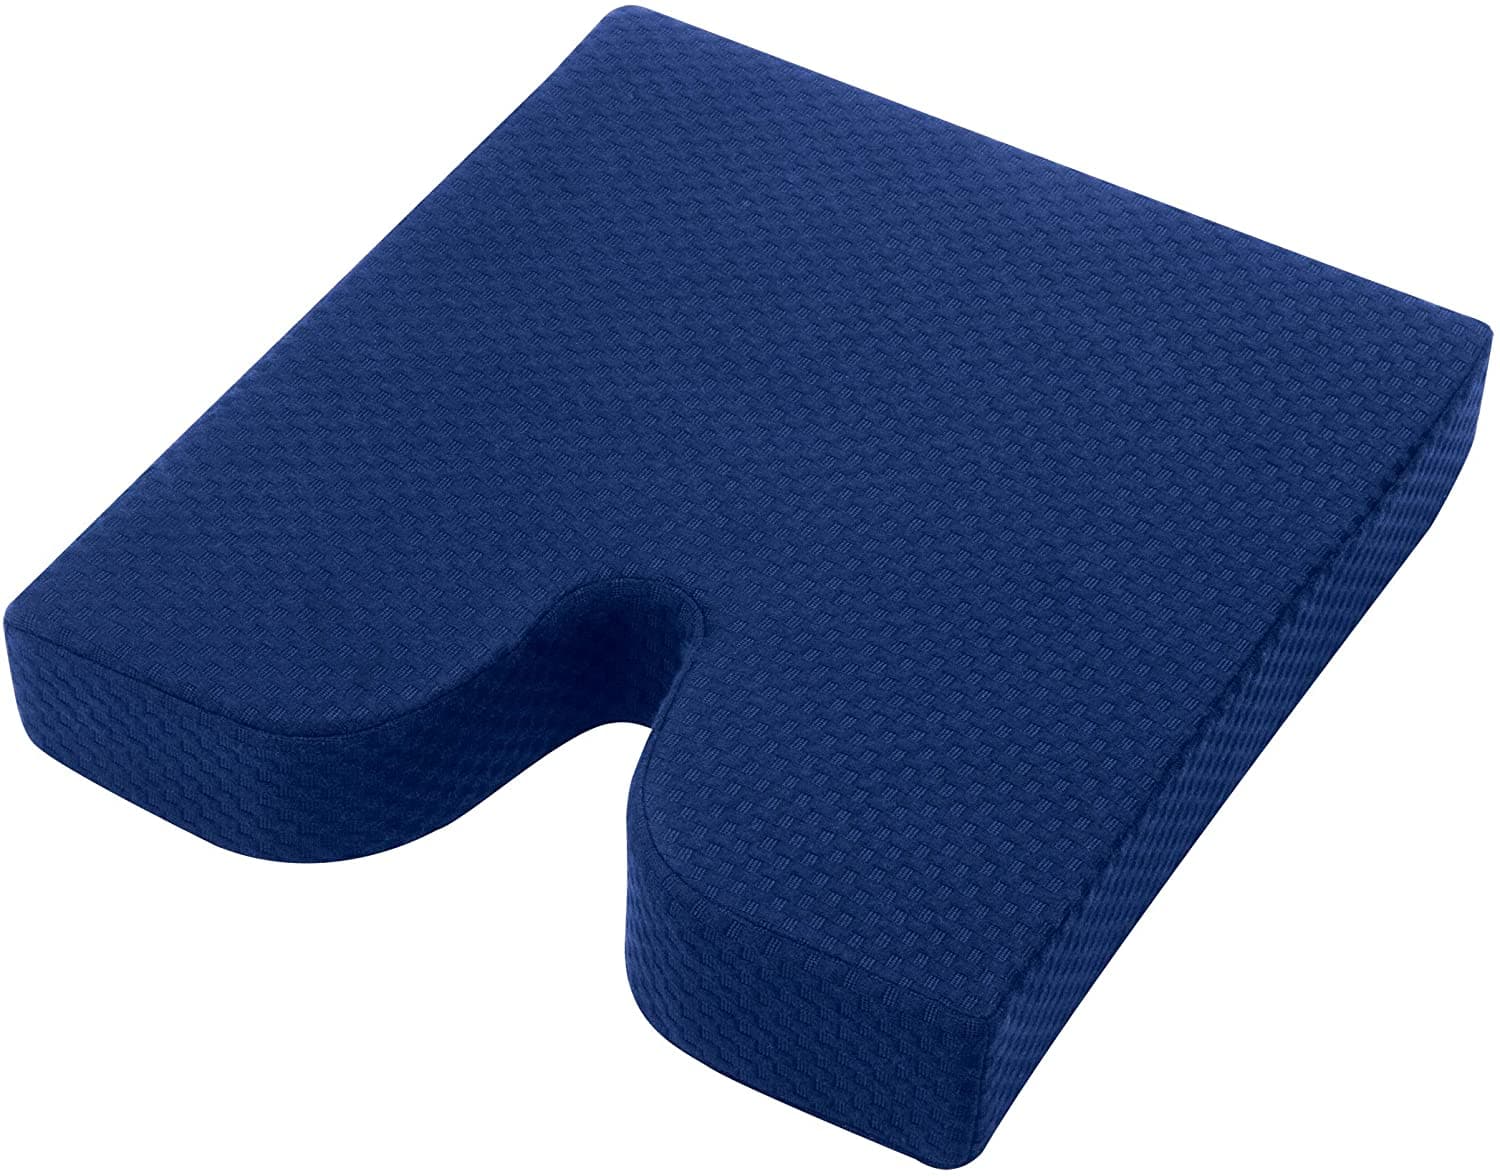 Coccyx Pillows and Coccyx Cushion for Tailbone Pain